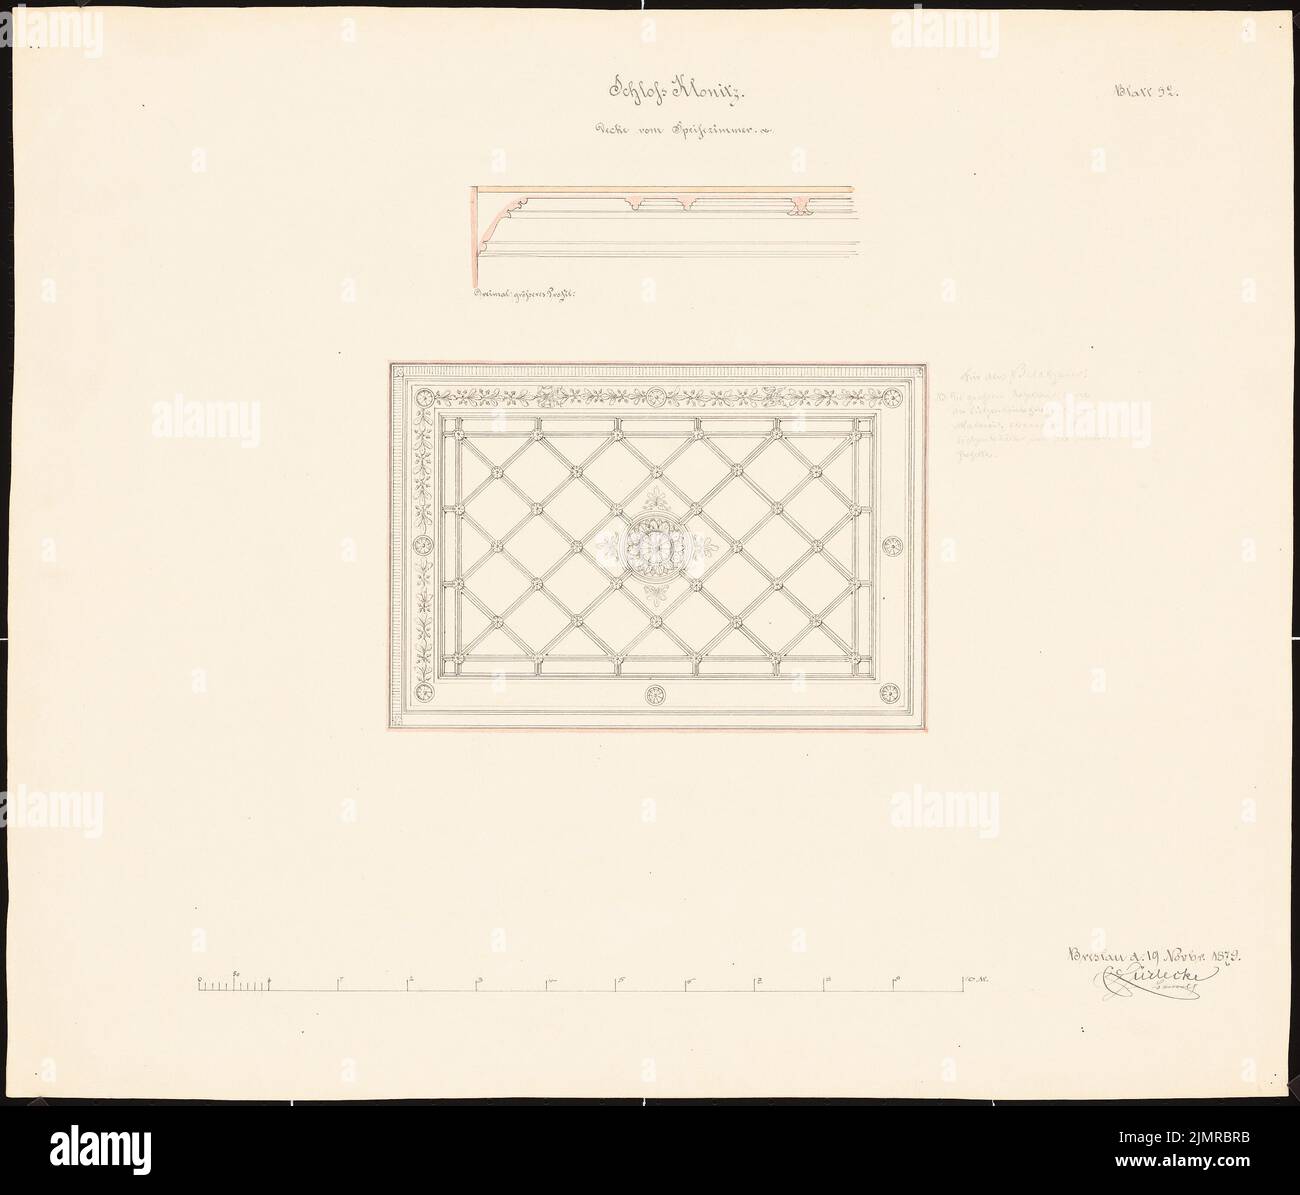 Lüdecke Carl Johann Bogislaw (1826-1894), Klonitz Castle. Conversion and expansion (November 19, 1879): Ceiling mirror and partial cut of the dining room blanket, scale bar. Ink and pencil watercolored on the box, 47.4 x 55.7 cm (including scan edges) Lüdecke Carl Johann Bogislaw  (1826-1894): Schloss Klonitz. Umbau und Ausbau Stock Photo